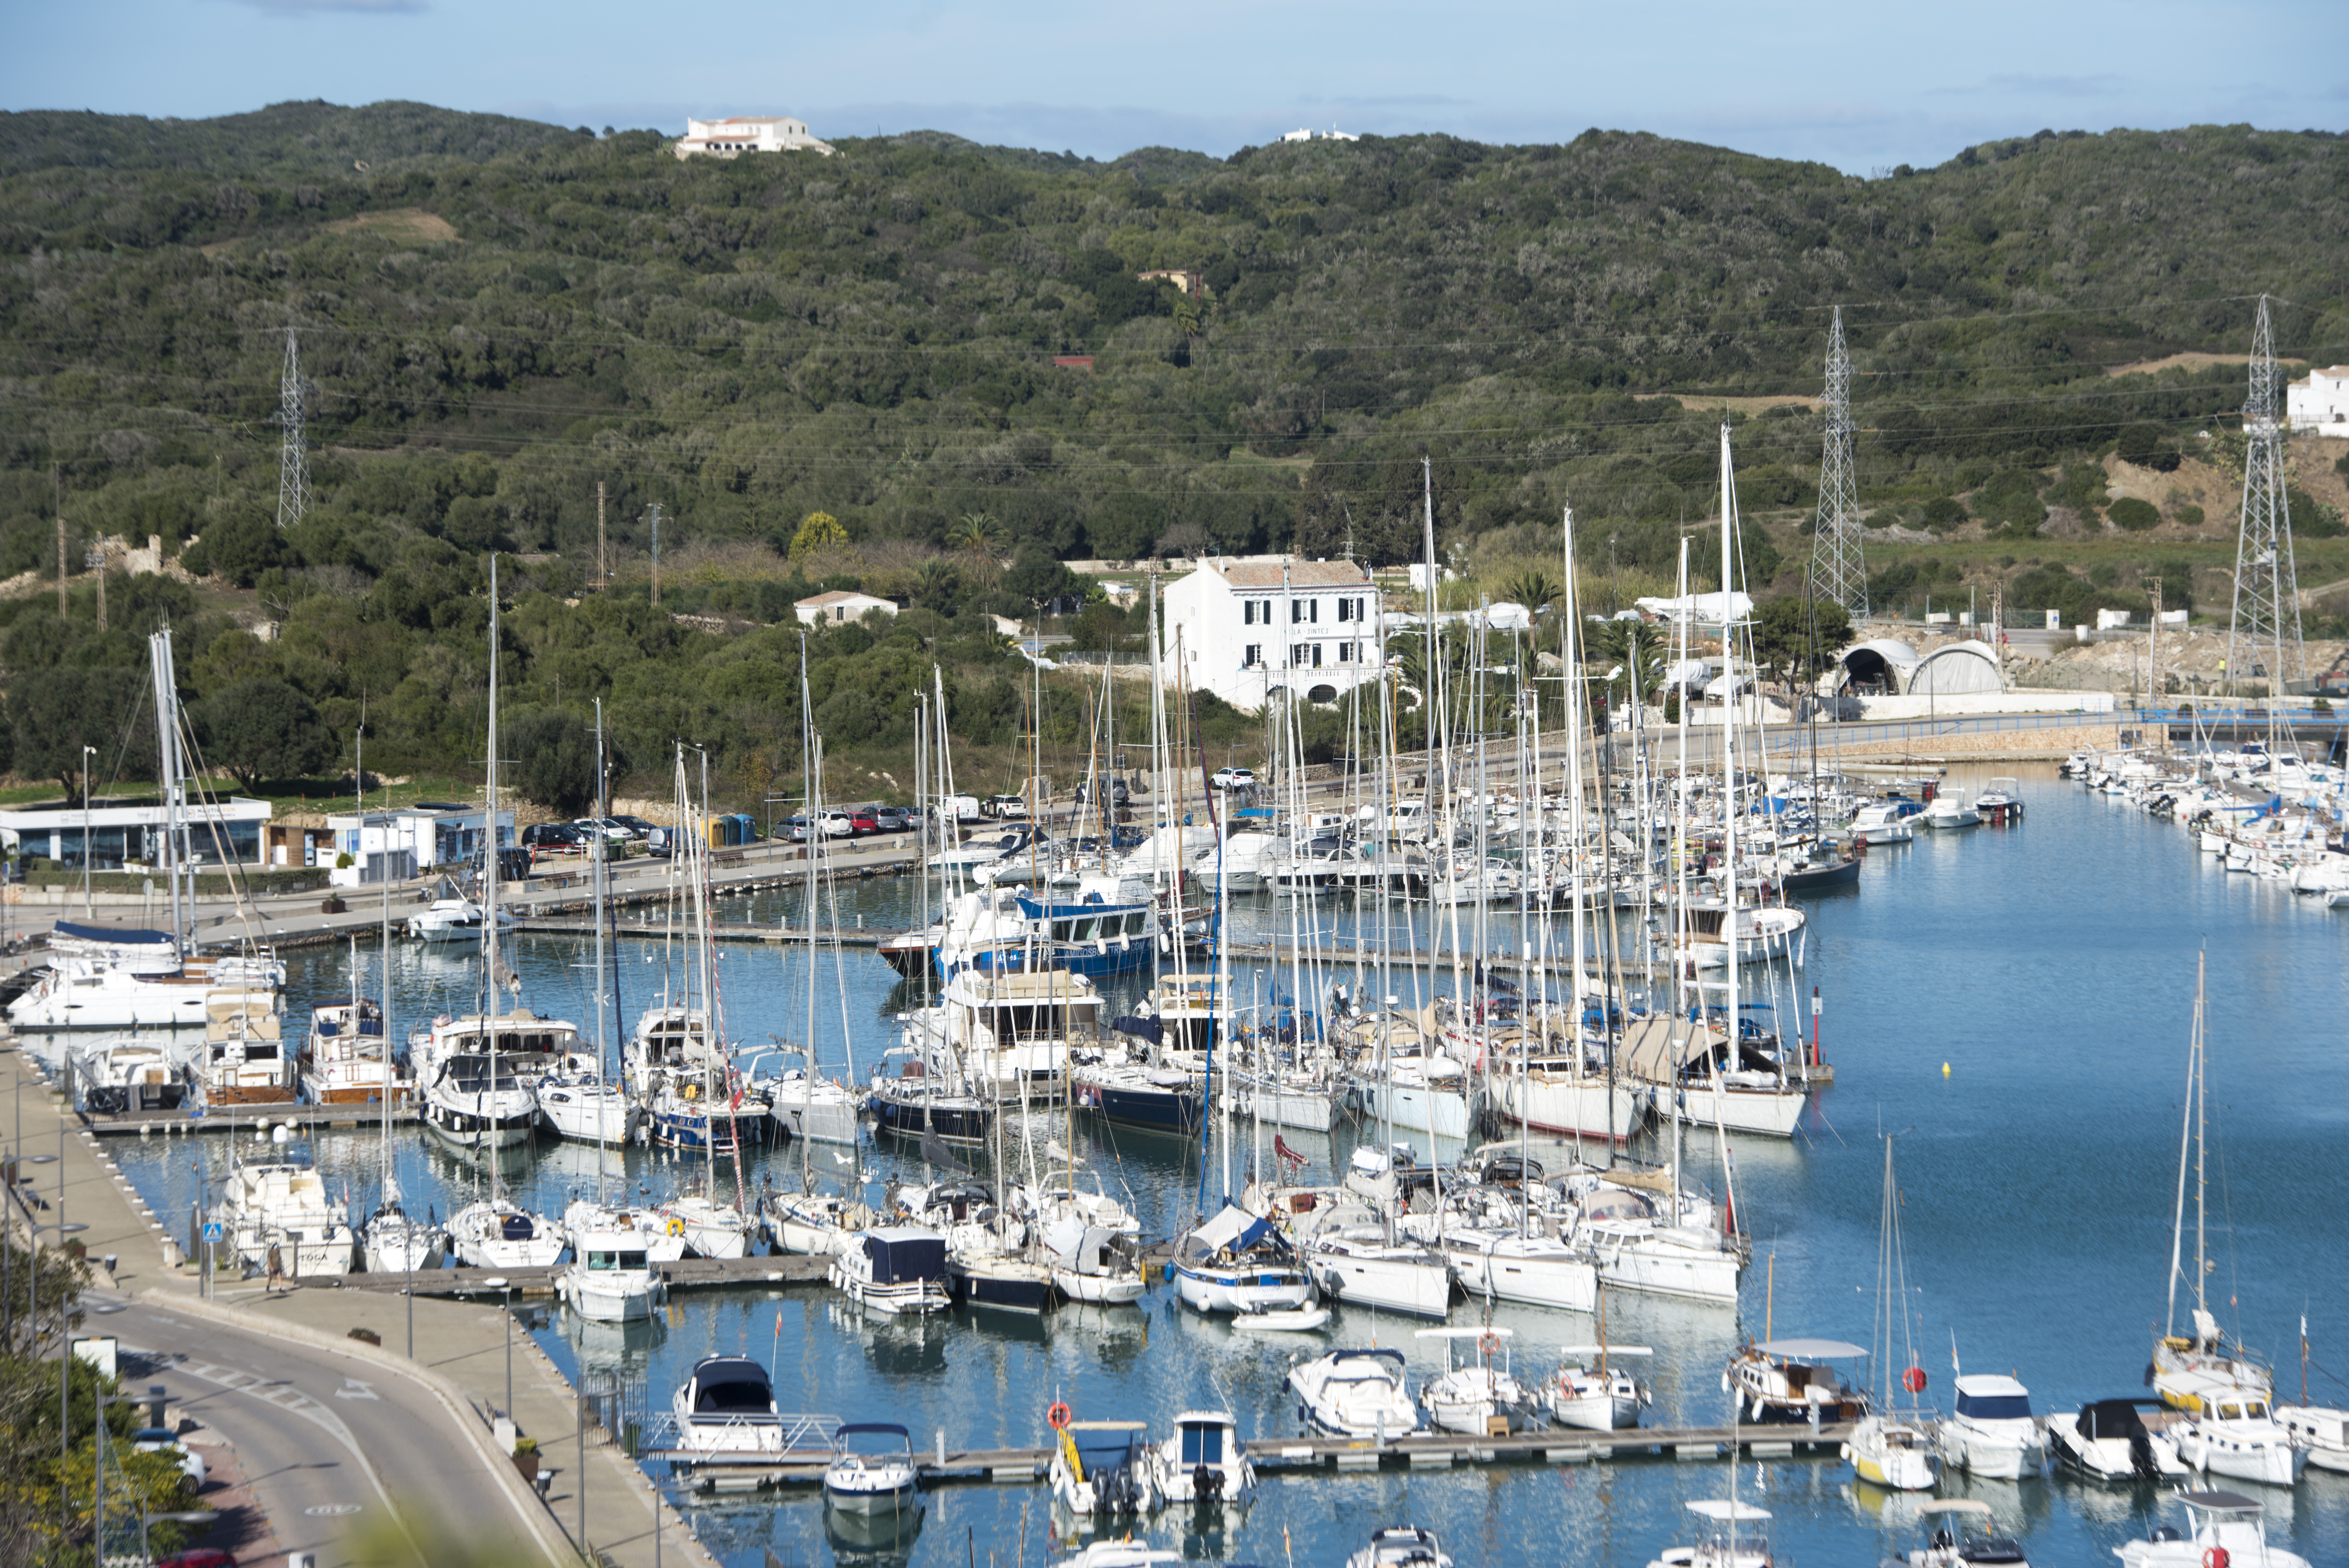 The APB will put out to tender the management of mooring places in the Colársega area of the port of Maó